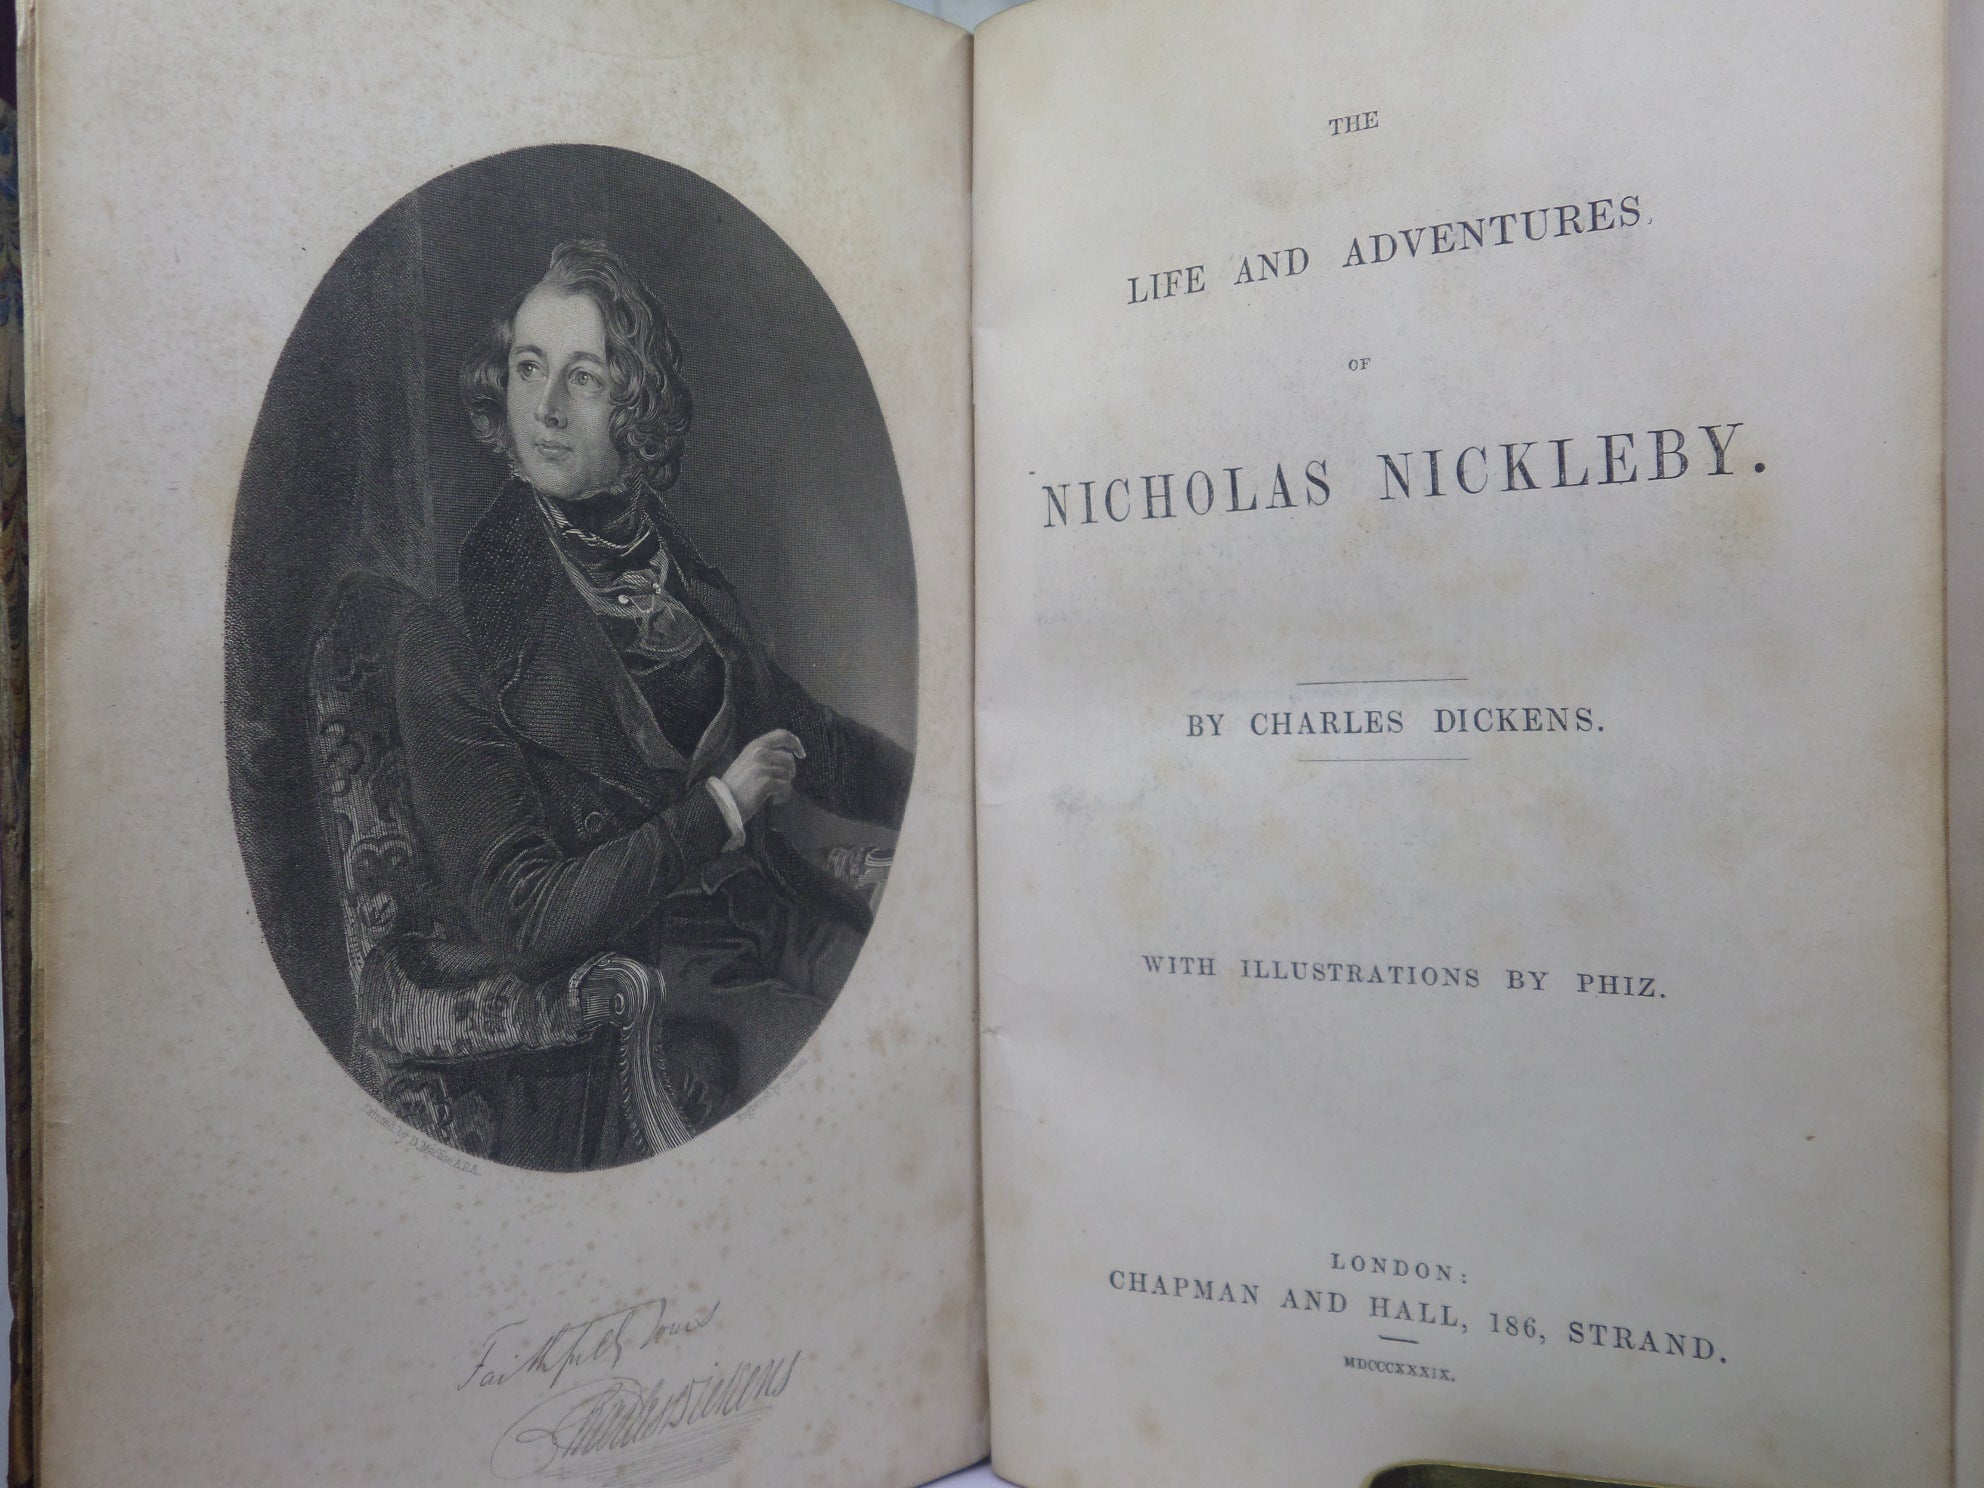 NICHOLAS NICKLEBY BY CHARLES DICKENS 1839 FIRST EDITION LEATHER BINDING